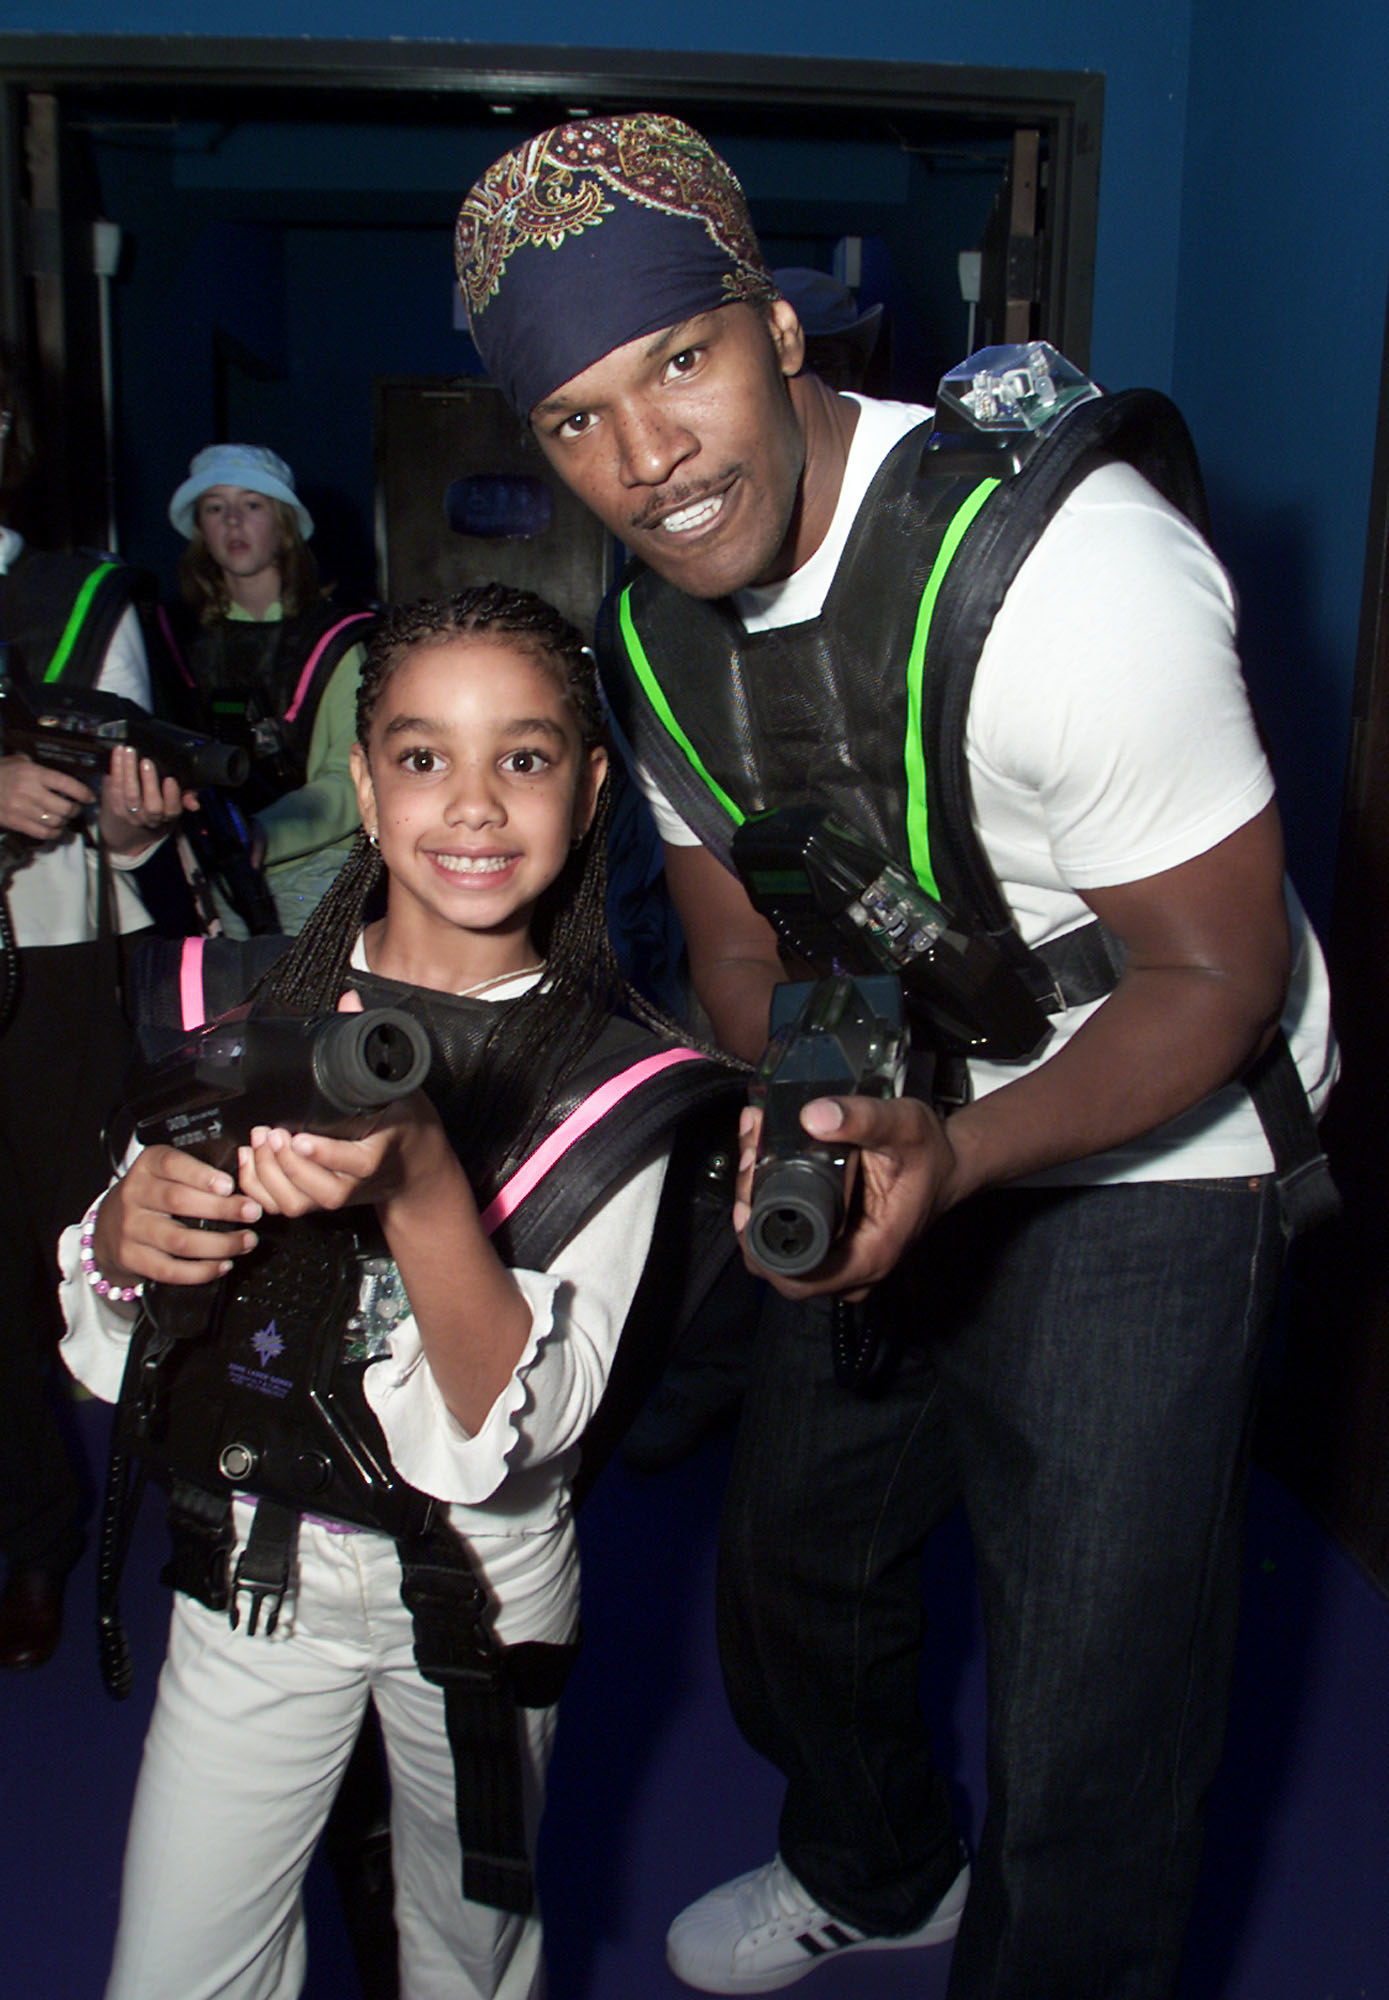 corinne and her dad ready for laser tag